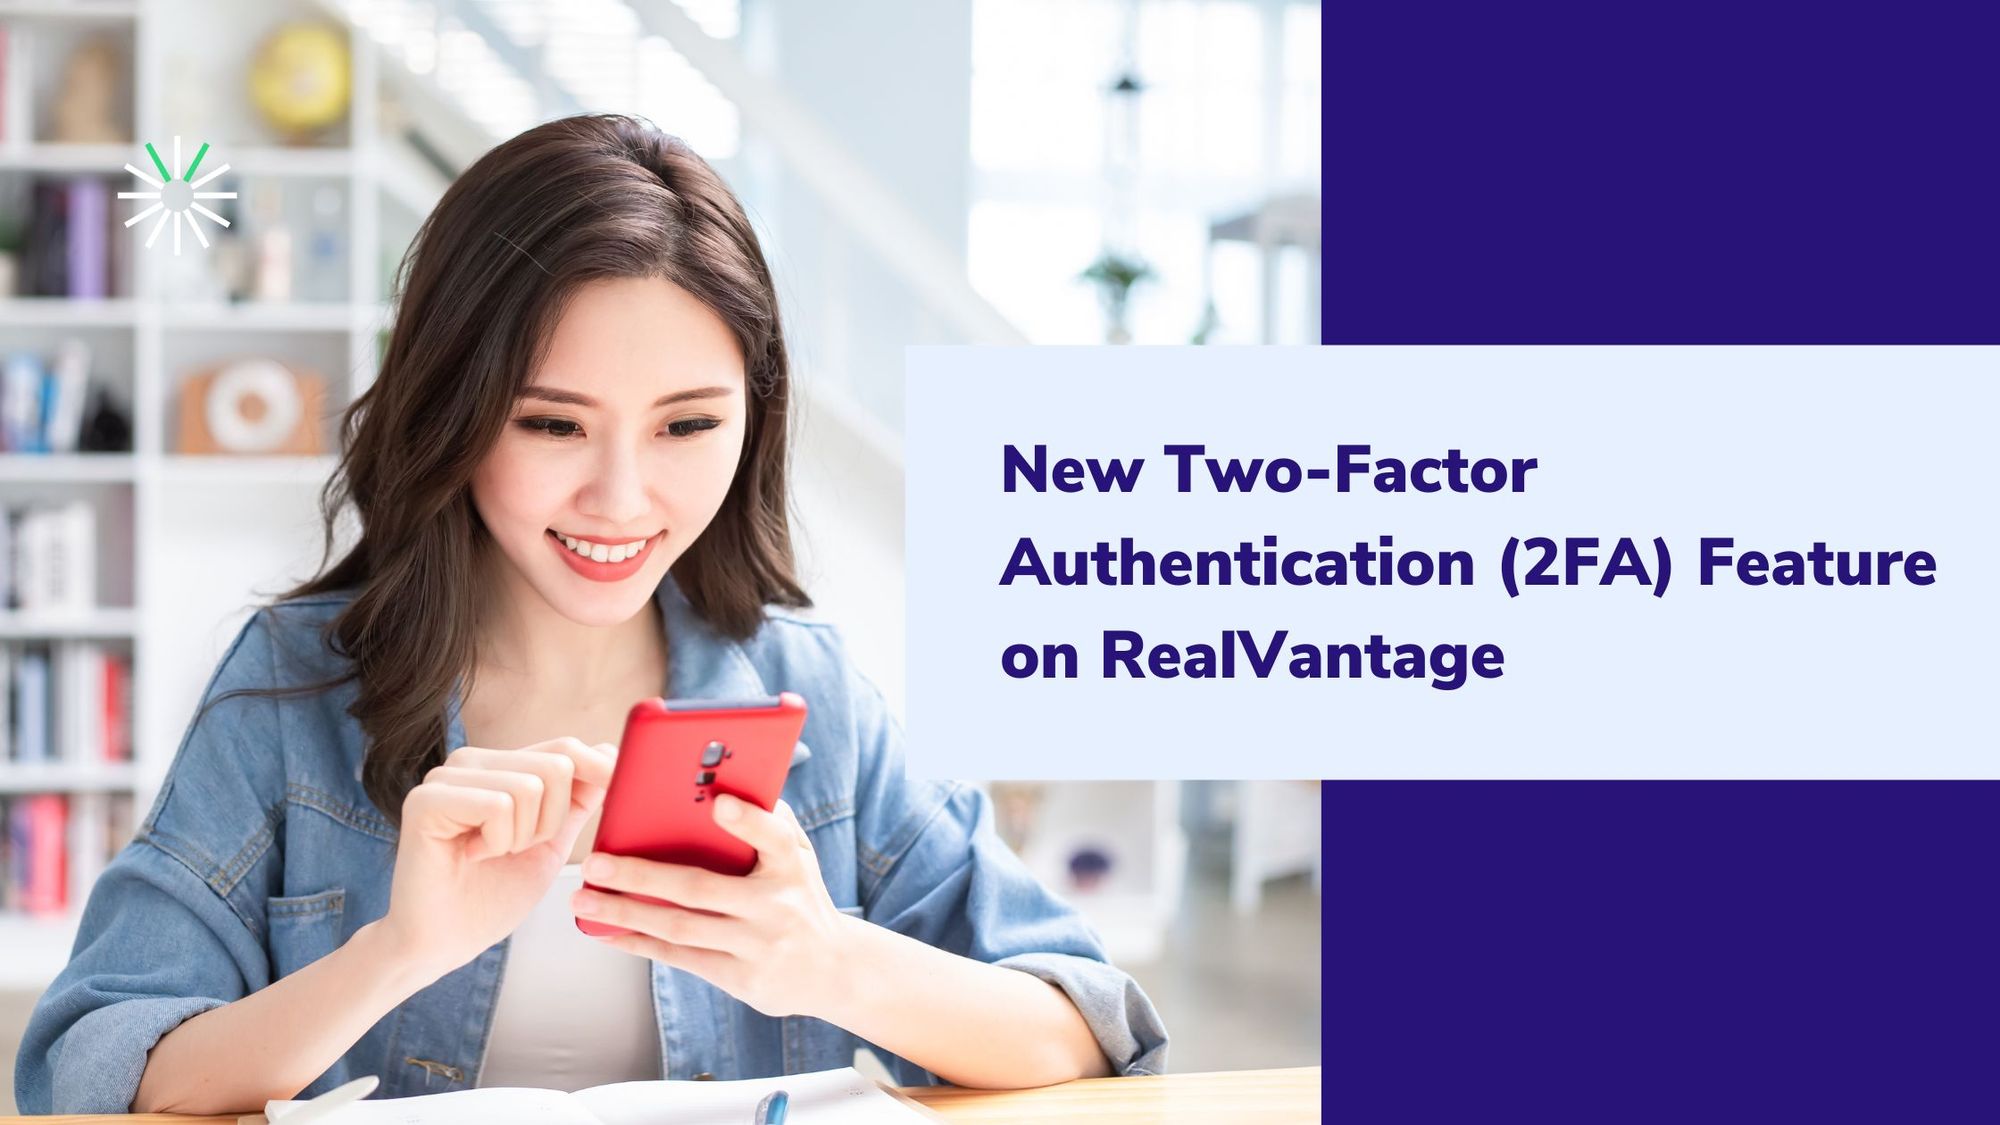 New Two-Factor Authentication (2FA) Feature on RealVantage